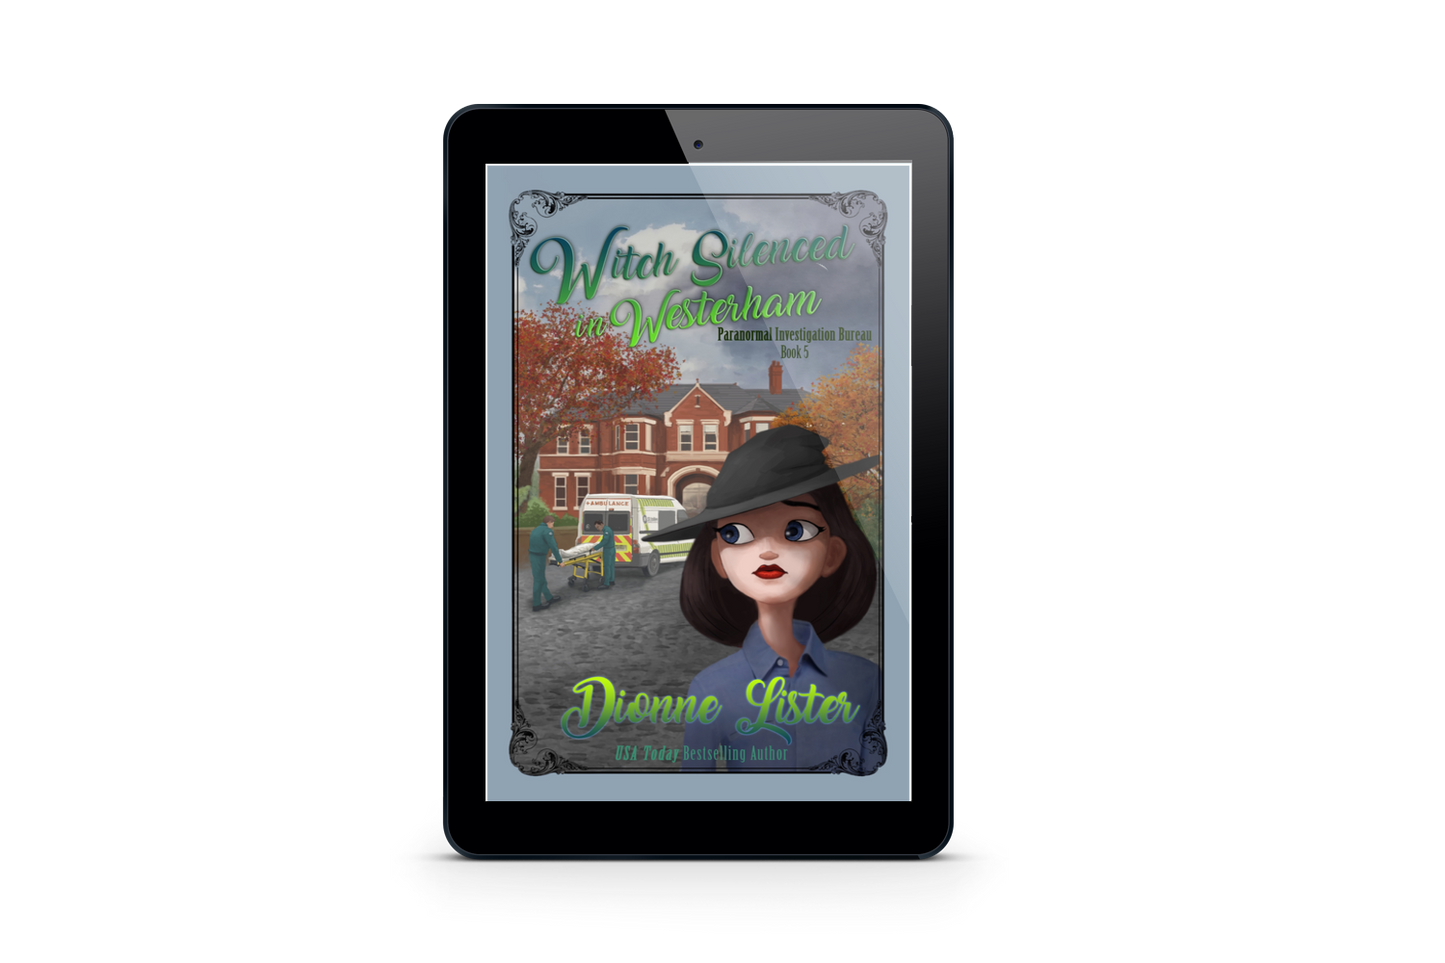 Witch Silenced in Westerham—Paranormal Investigation Bureau Book 5